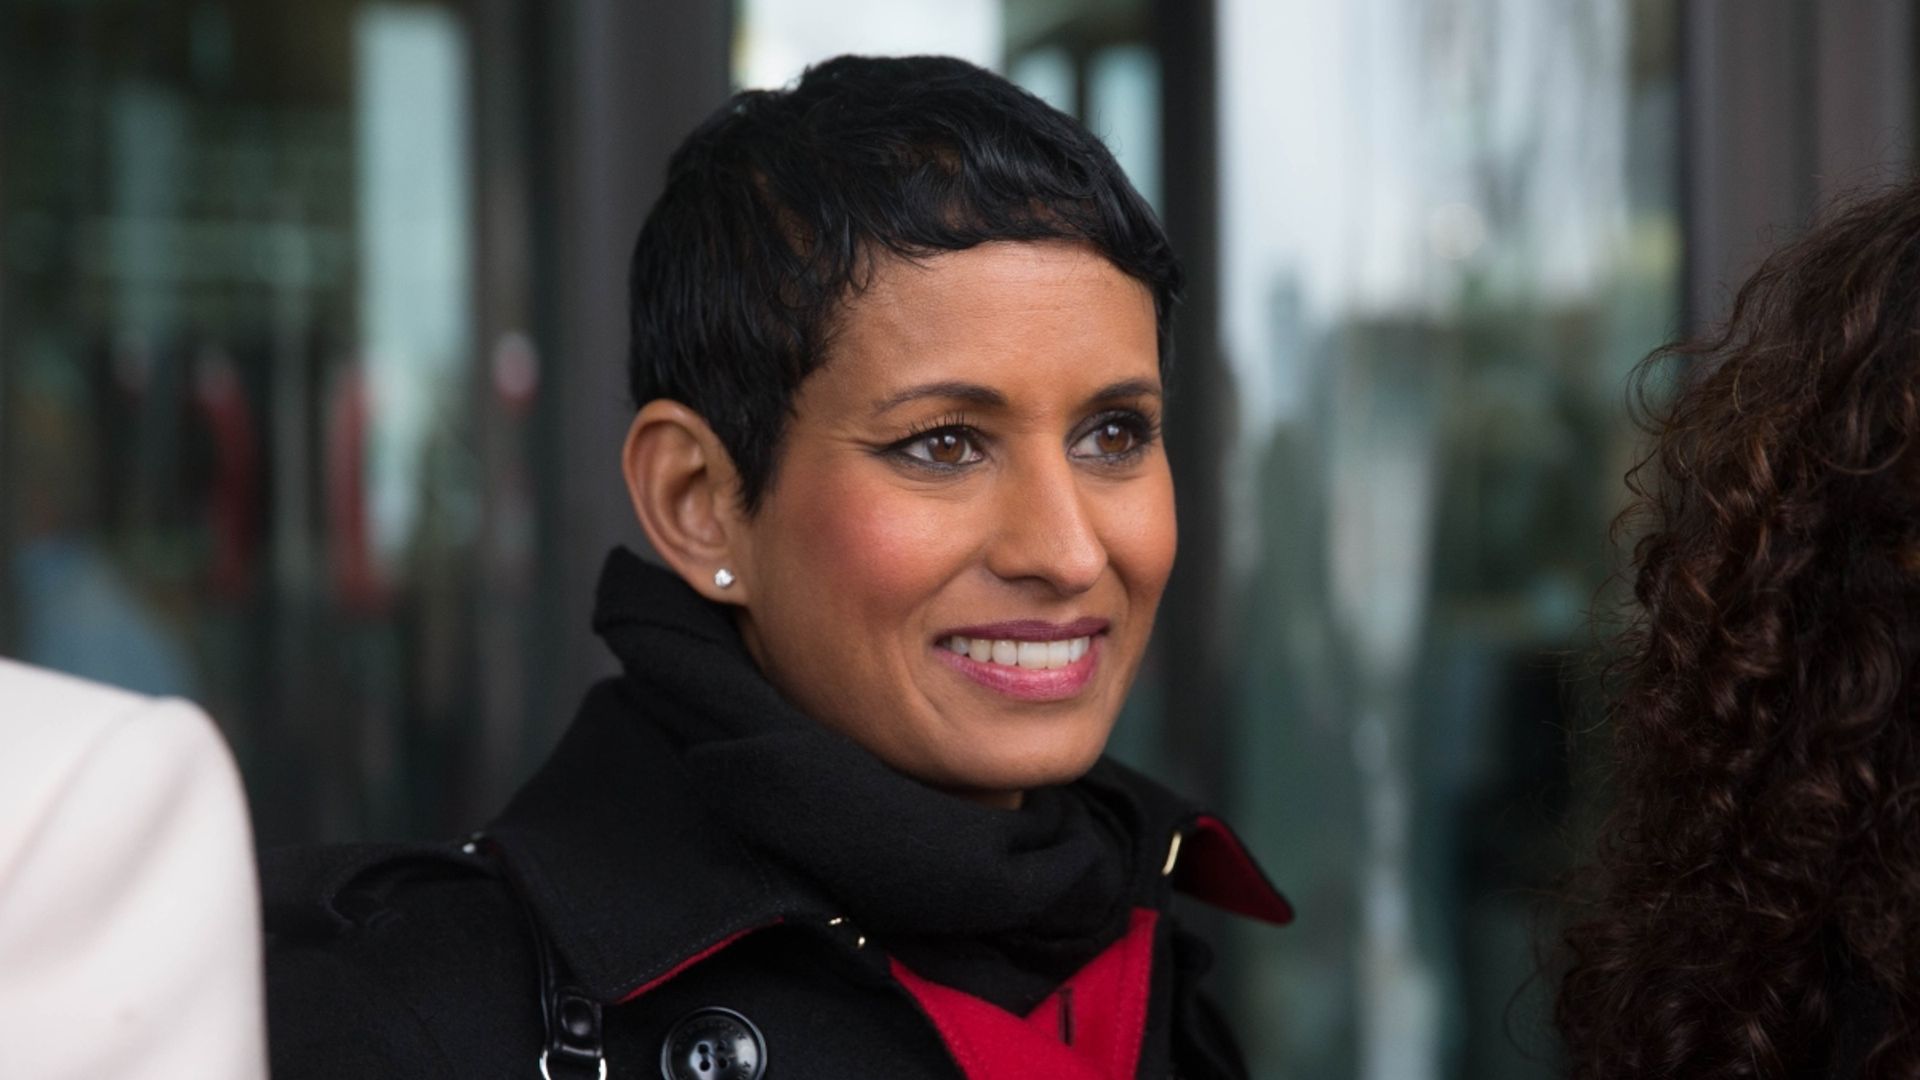 BBC Breakfast star Naga Munchetty speaks out about viewer criticism over appearance